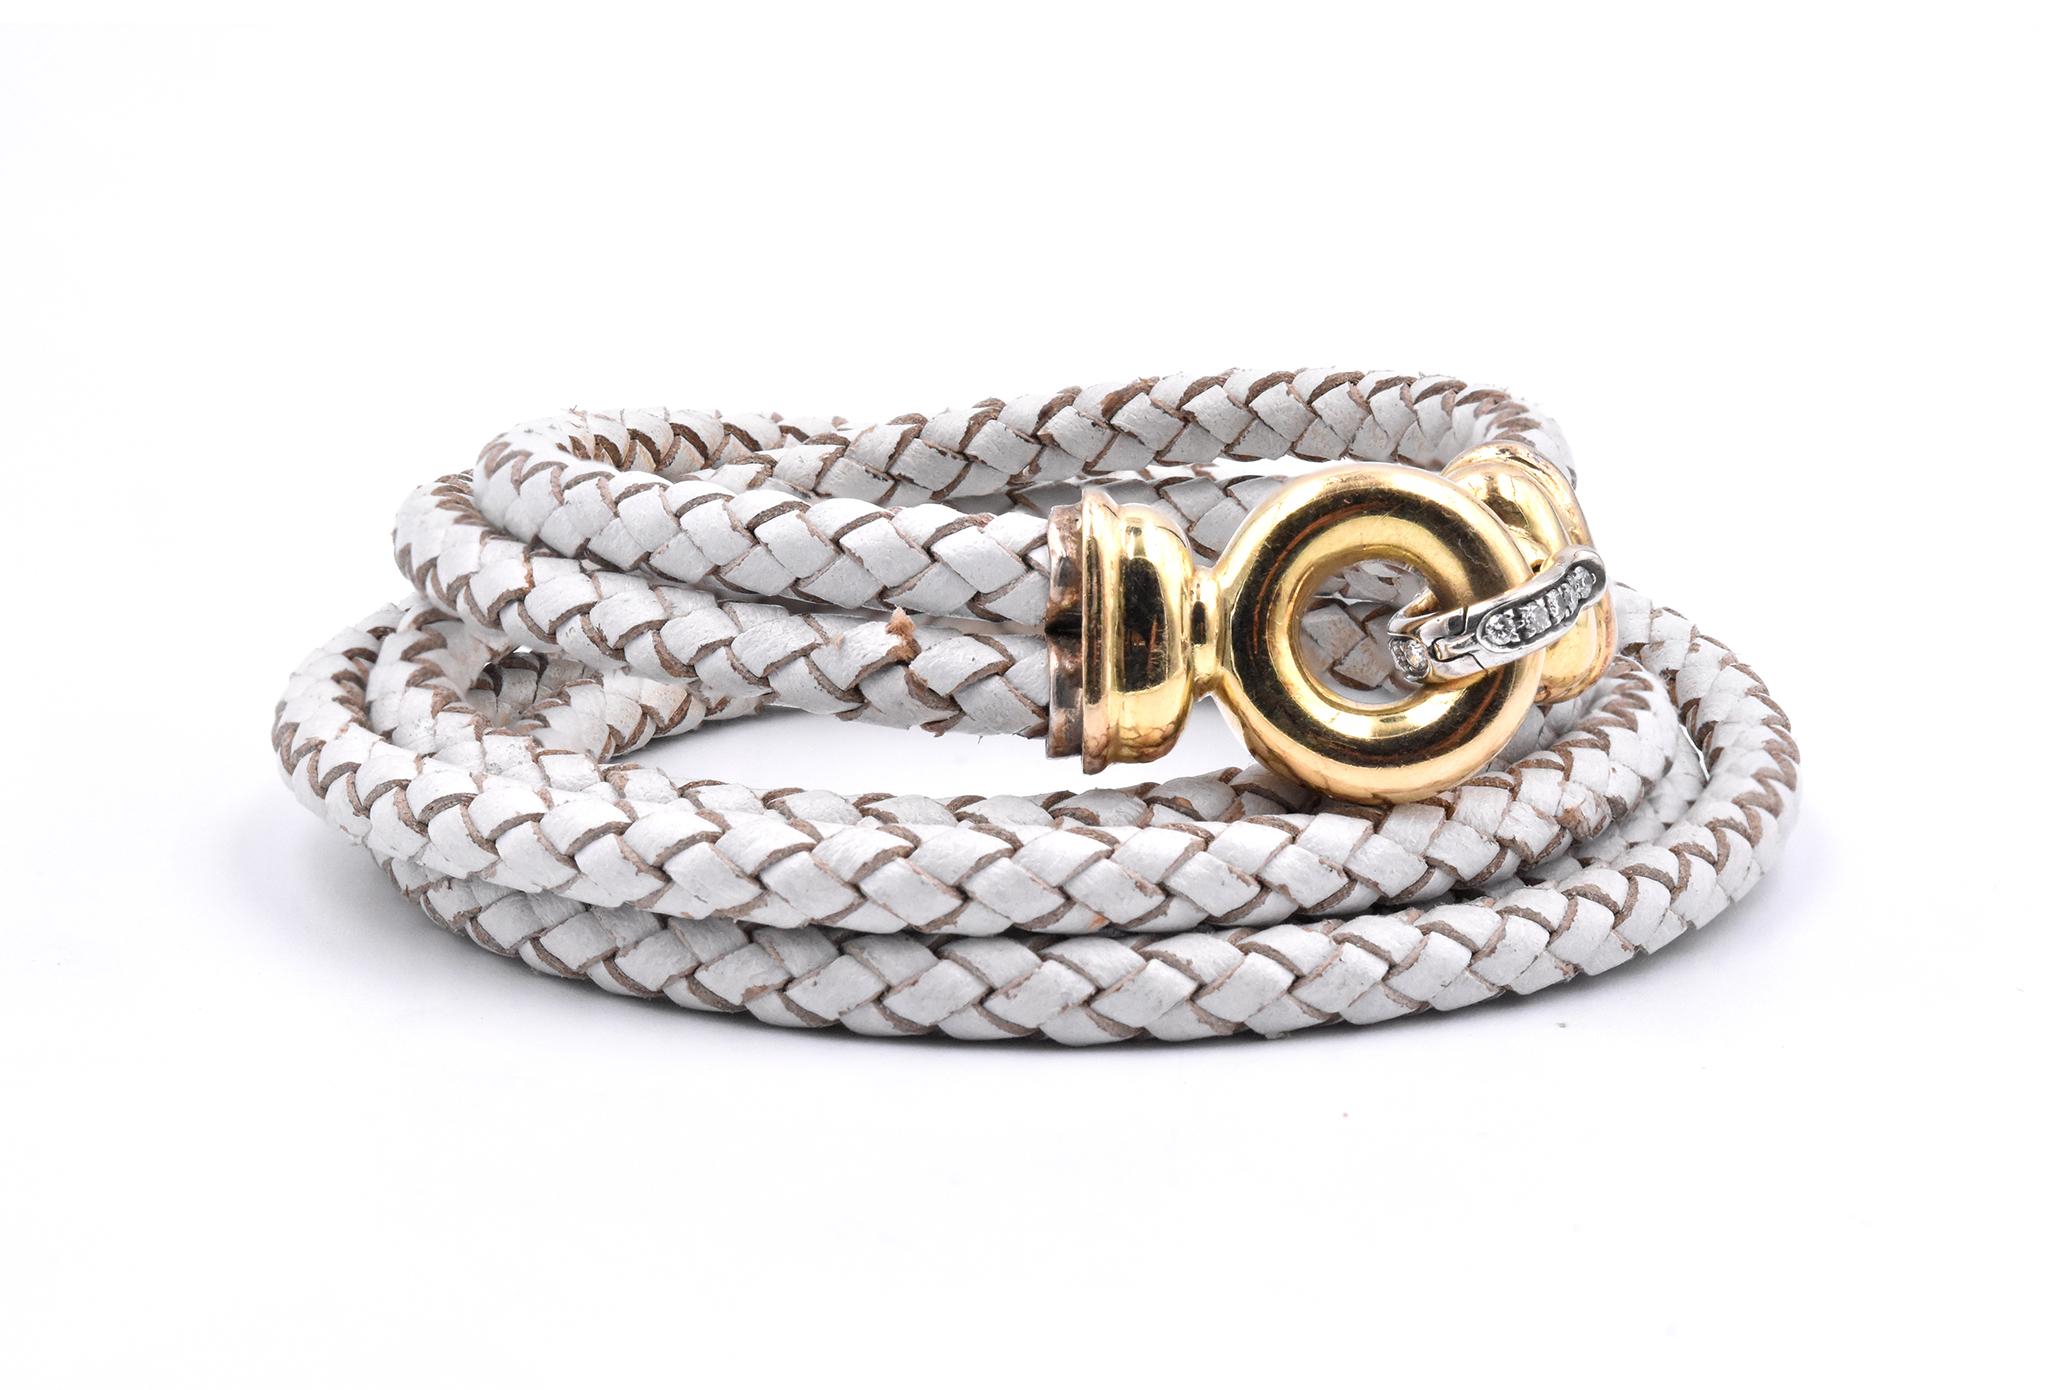 Designer: custom
Material: leather / 14K yellow gold
Diamond: 6 round cut = .10cttw
Color: H
Clarity: SI1
Dimensions: bracelet measures 22-Inches long
Weight: 26.74 grams
